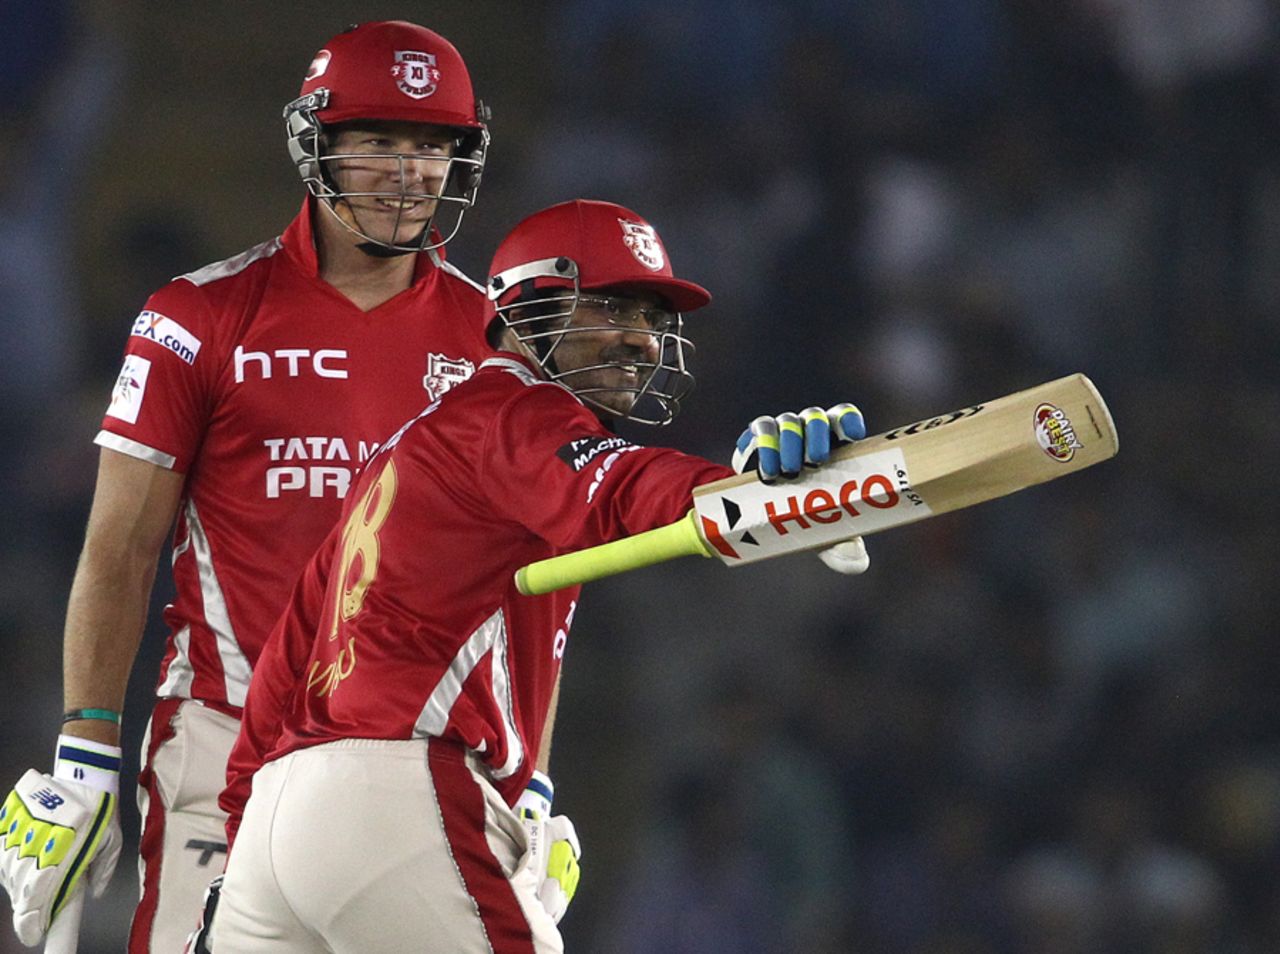 Virender Sehwag is all smiles after completing his fifty, Kings XI Punjab v Northern Knights, Champions League T20, Mohali, September 26, 2014